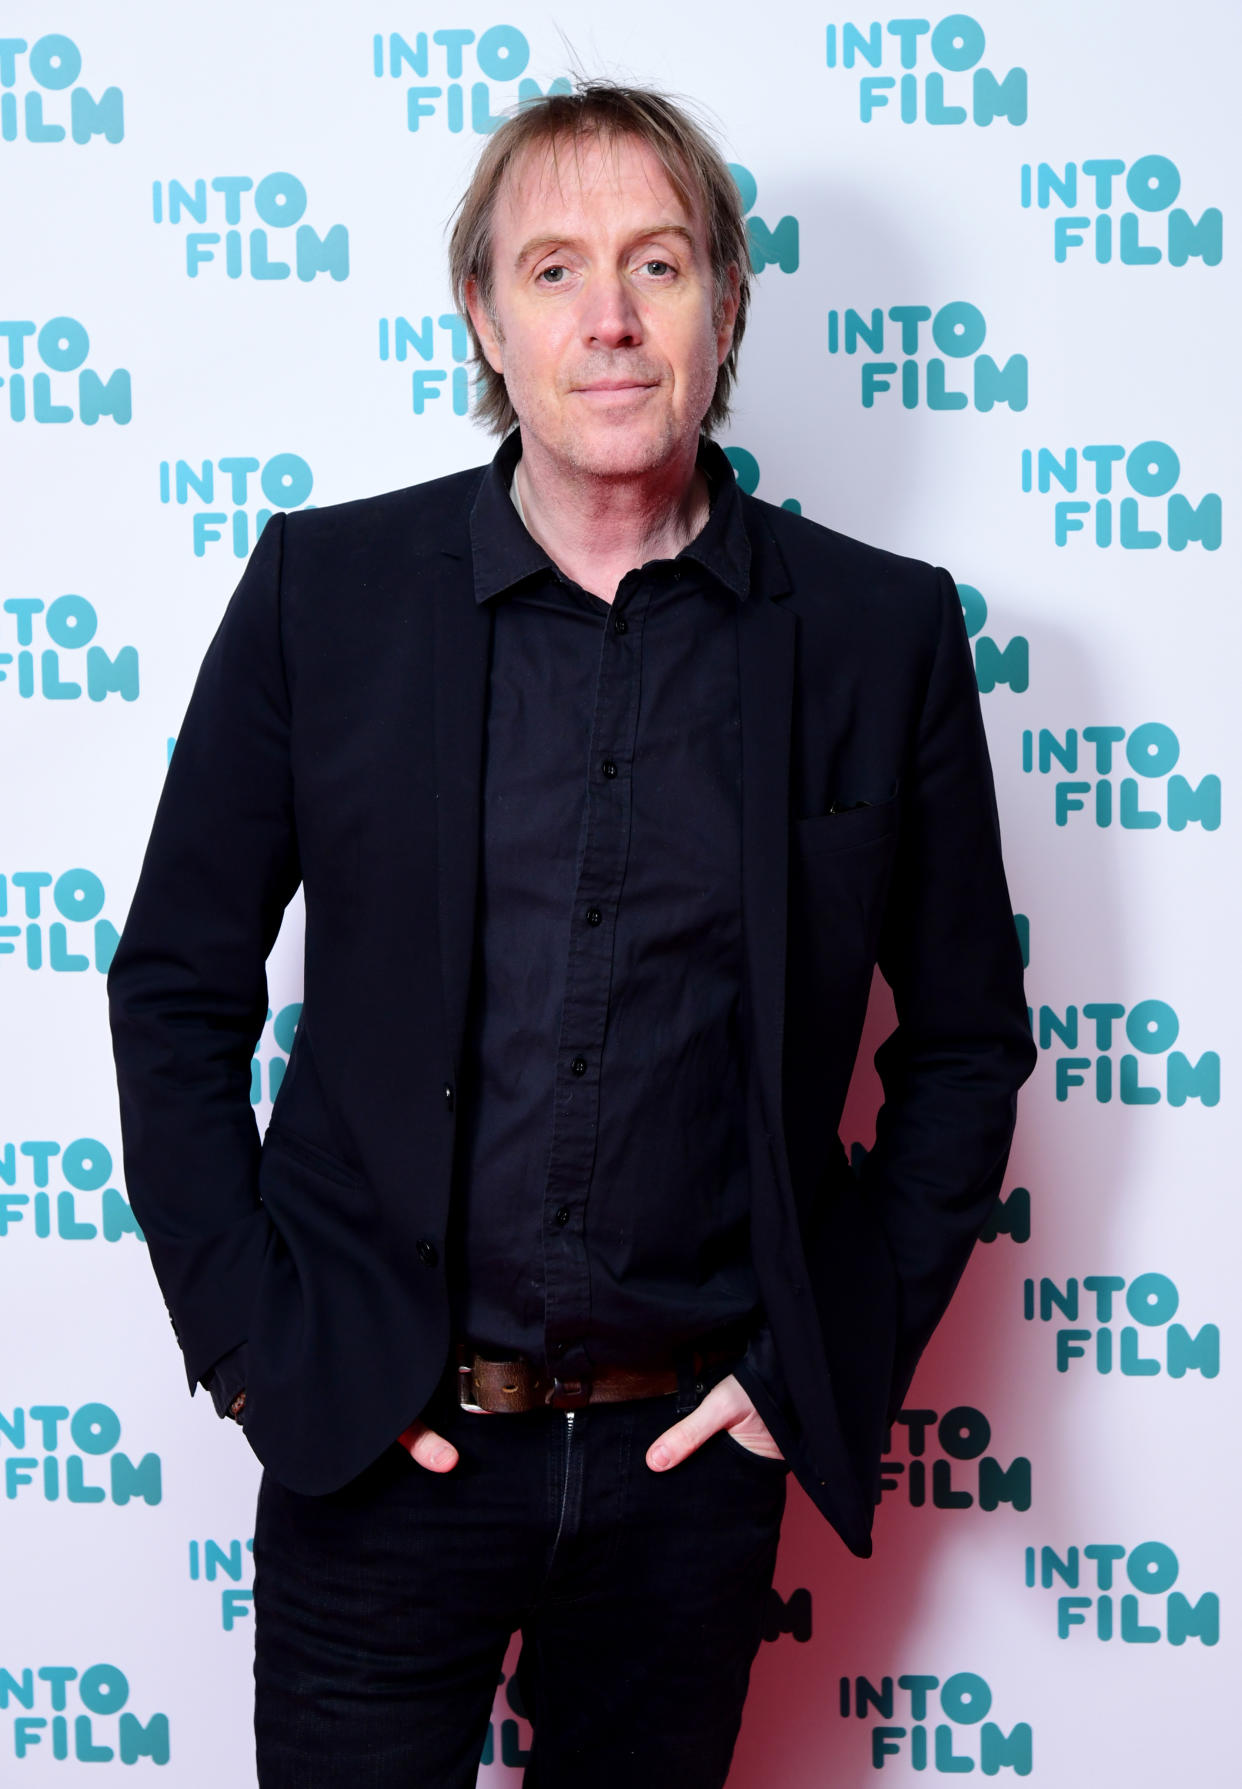 Rhys Ifans attending the fifth annual Into Film Awards, held at the Odeon Luxe in Leicester Square, London.